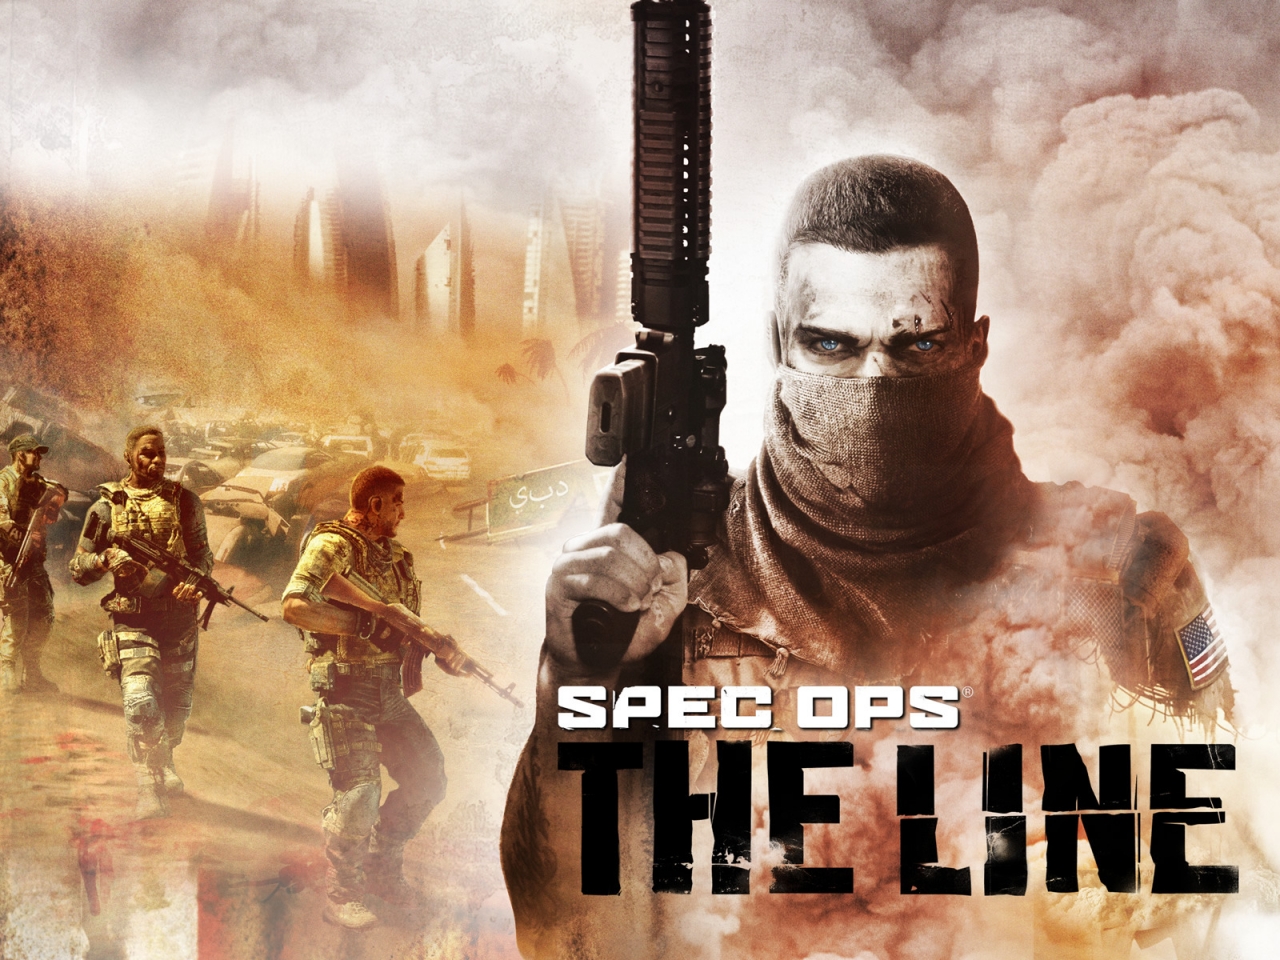 Spec Ops The Line for 1280 x 960 resolution